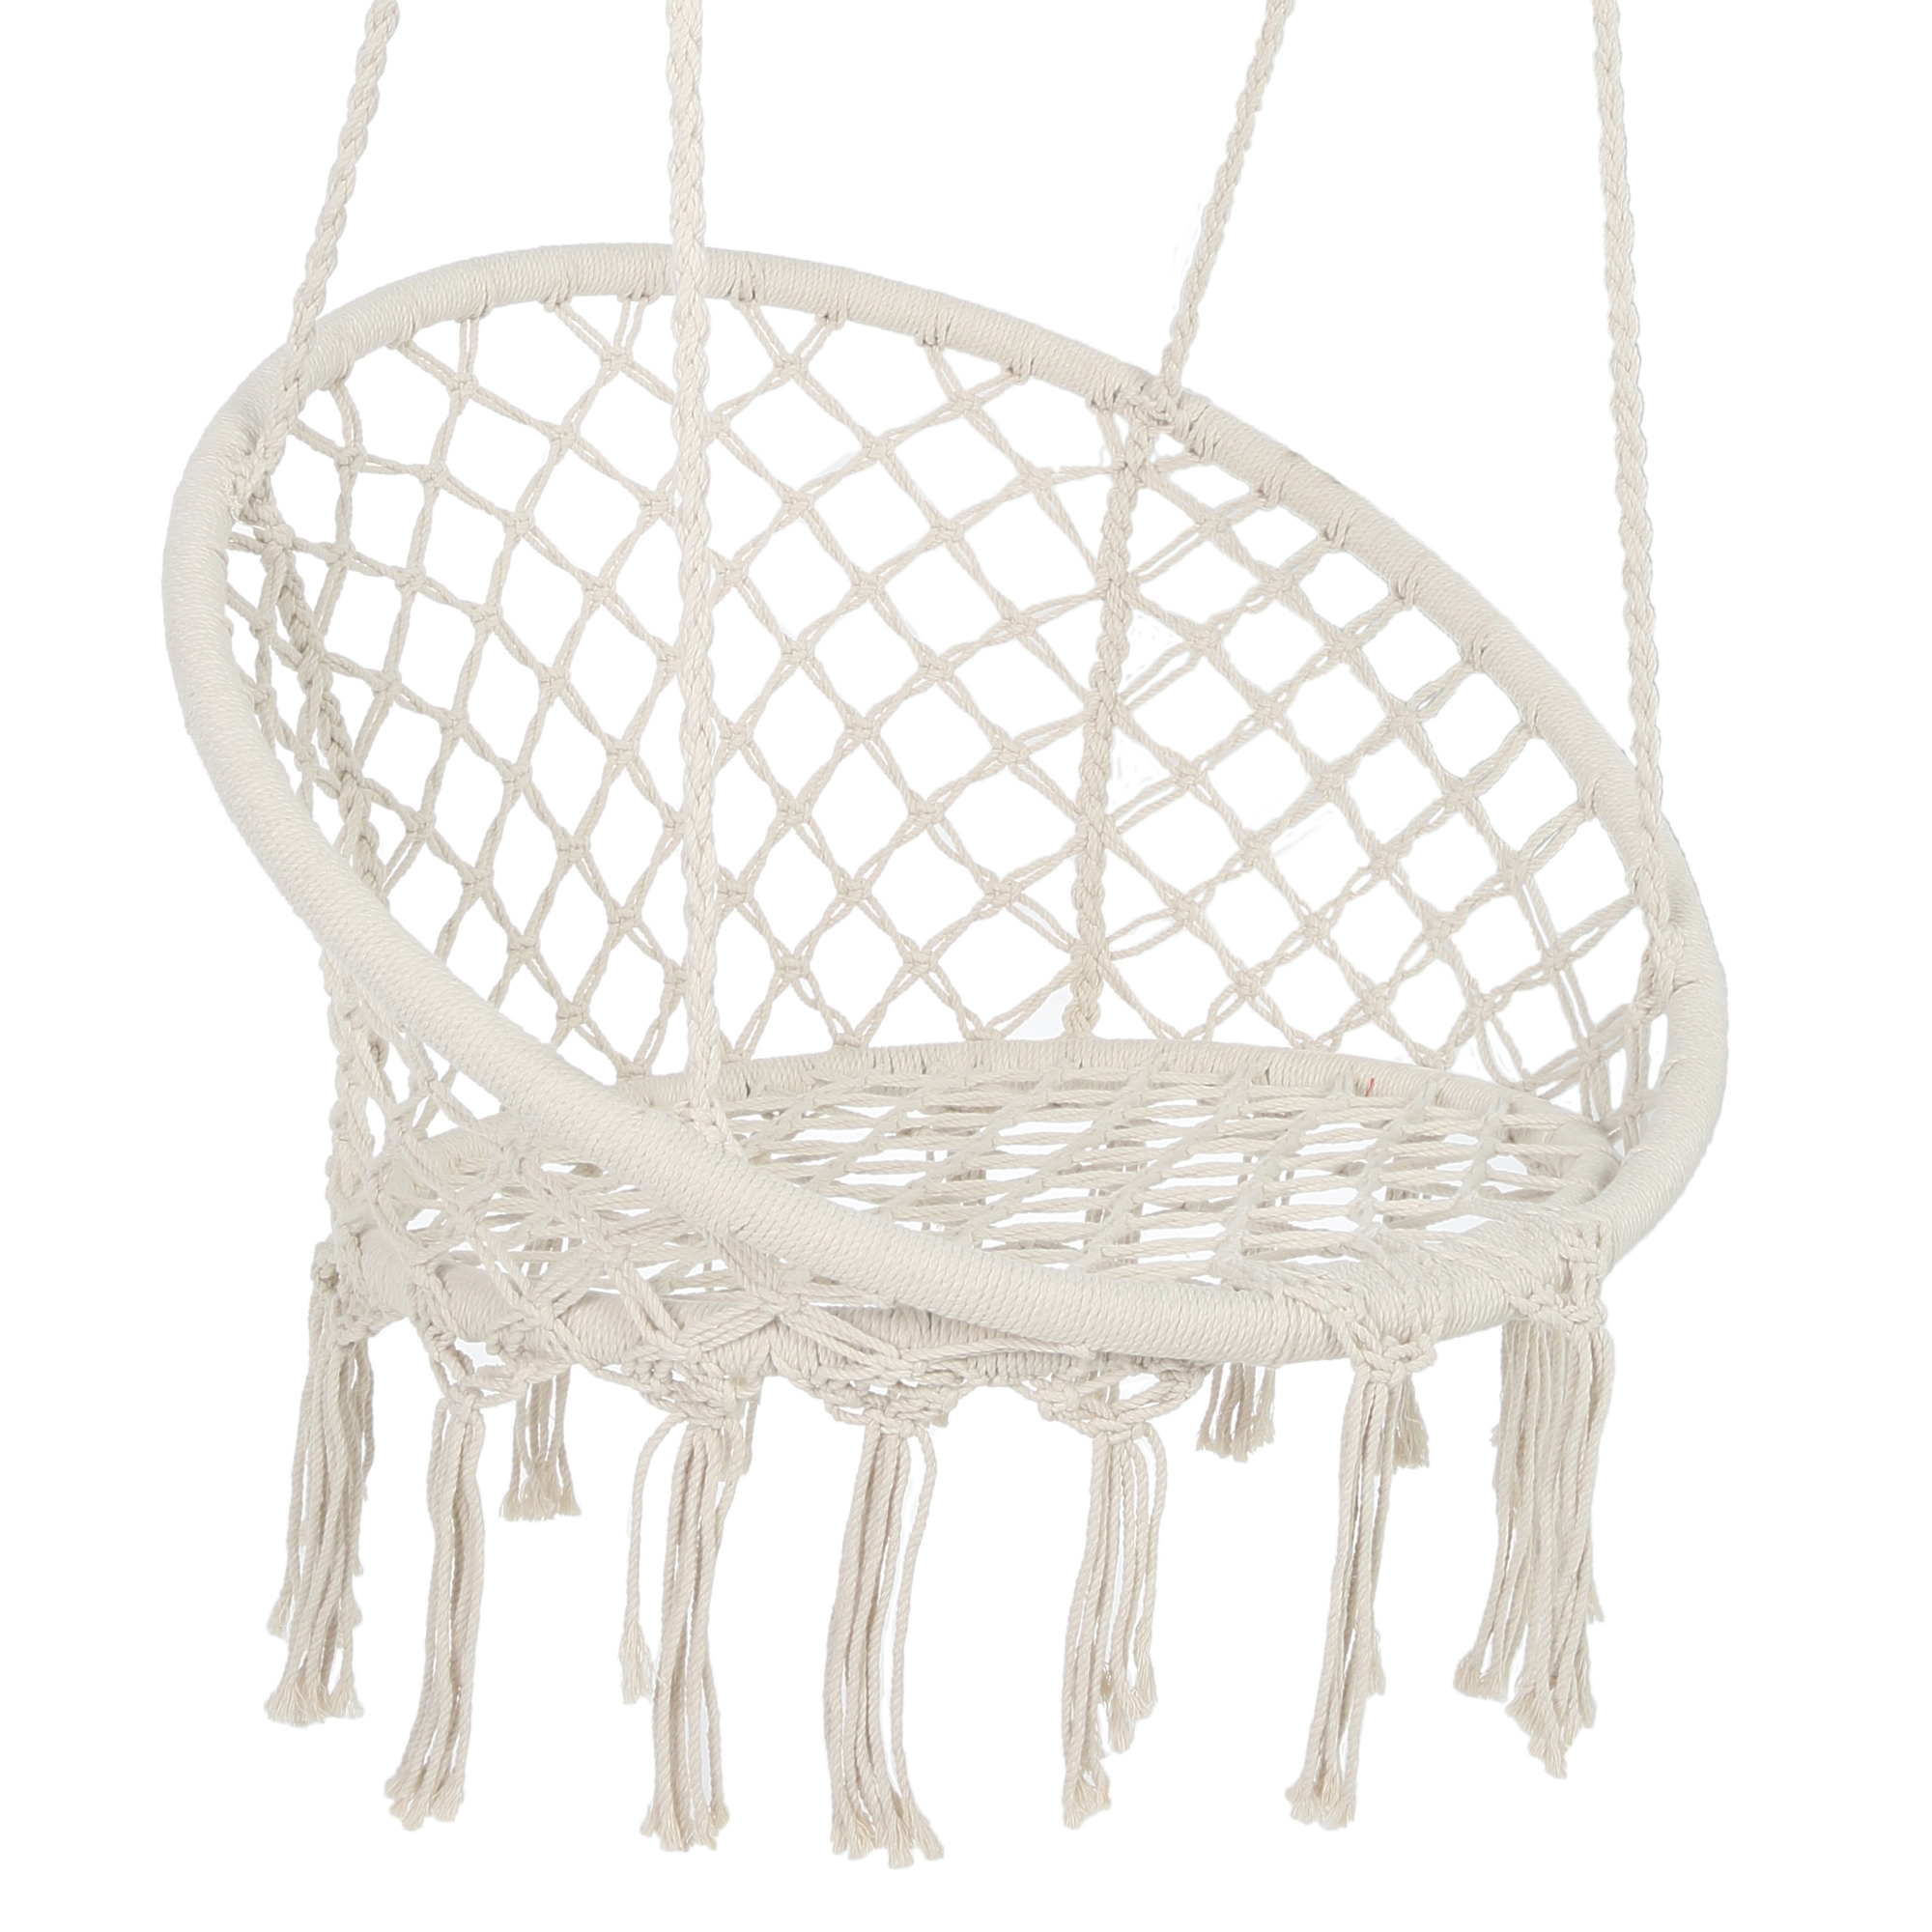 Max 330 Lbs Hanging Cotton Rope Hammock Swing Chair - W41917522